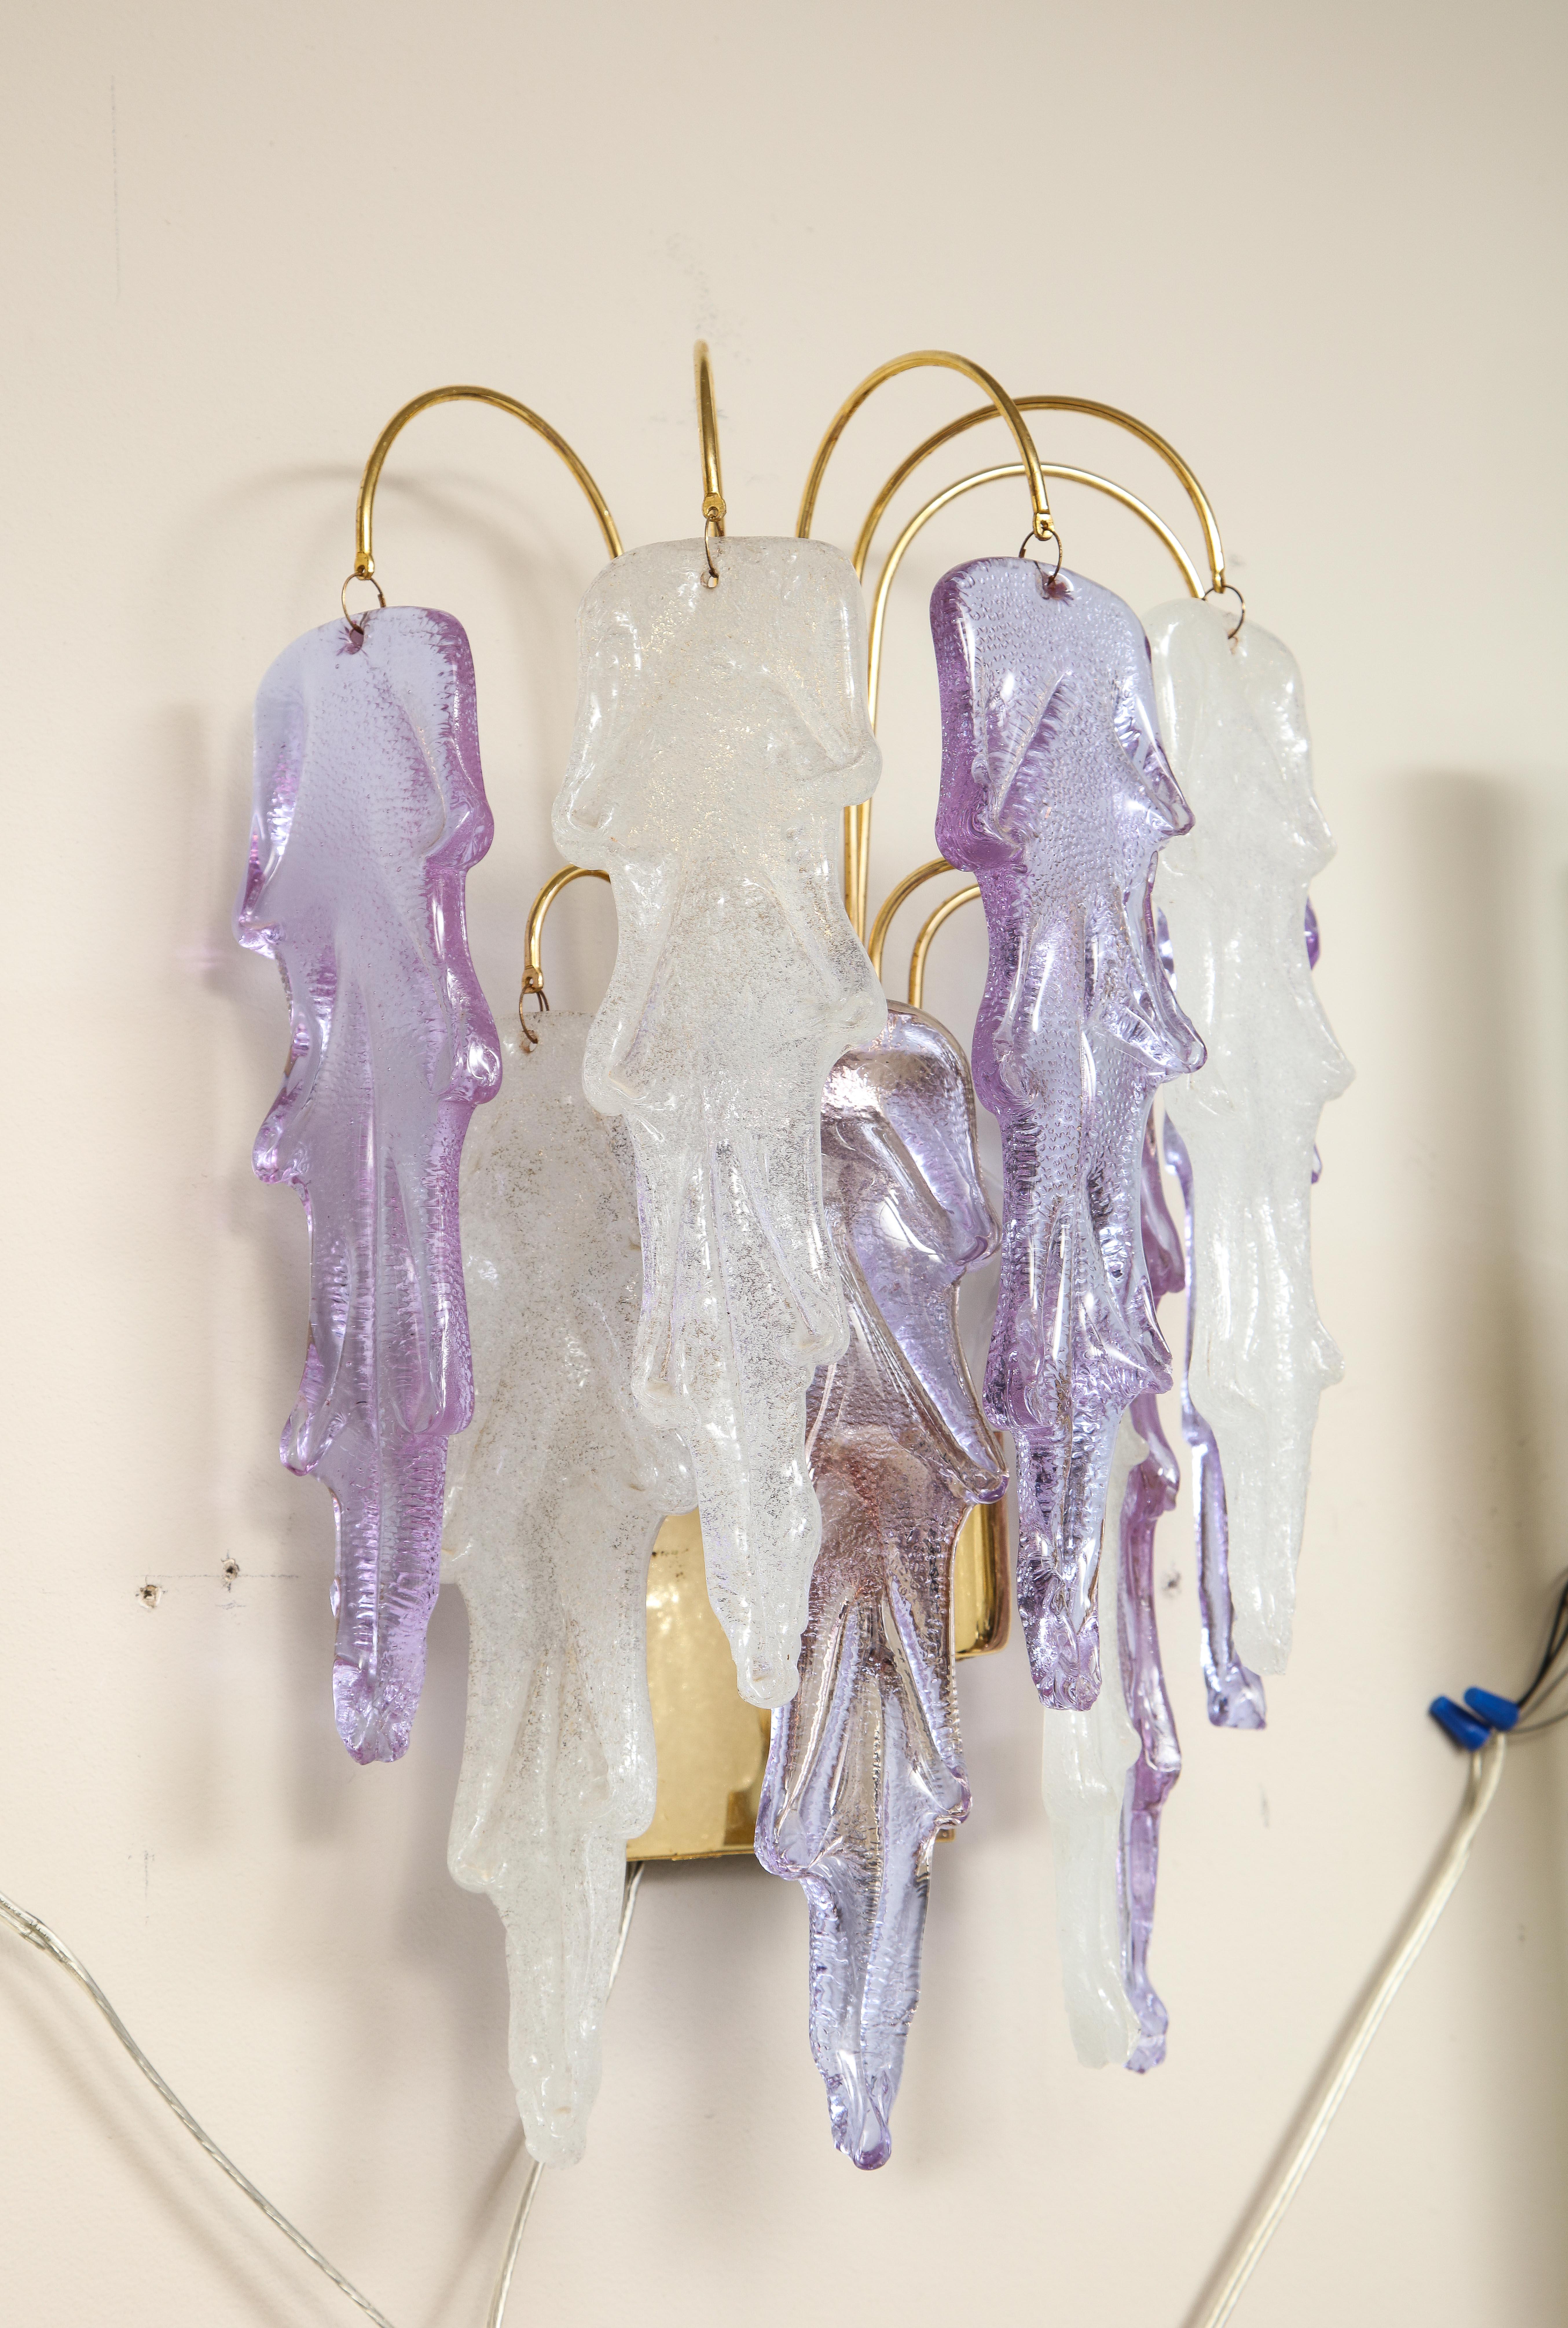 1970s Mazzega Italian Murano Glass Wall Sconces with Amethyst and Frost Glass For Sale 1